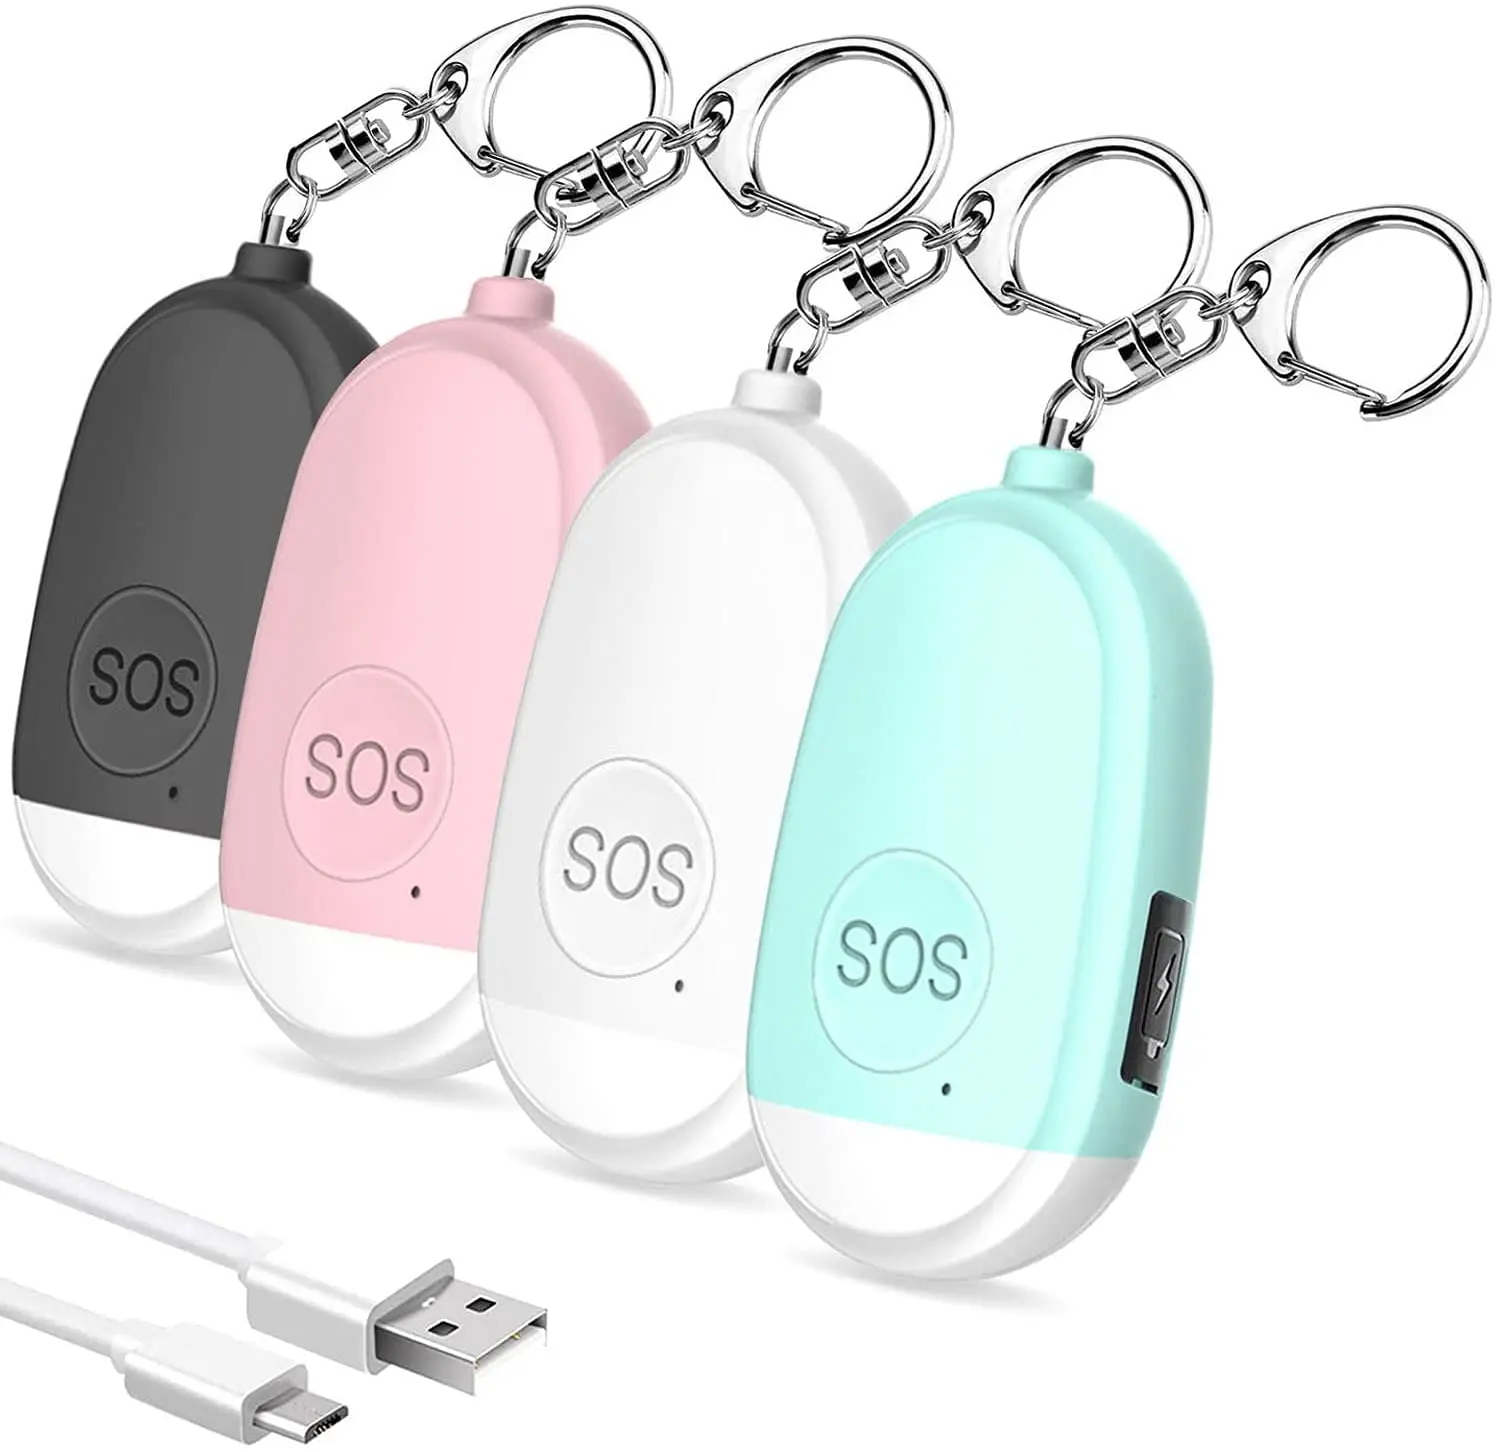 Personal Security Alarm Keychain Blue Emergency Survival Anti-Rape Siren with LED Female Safety Protection and Portable Alarm130db Warning 